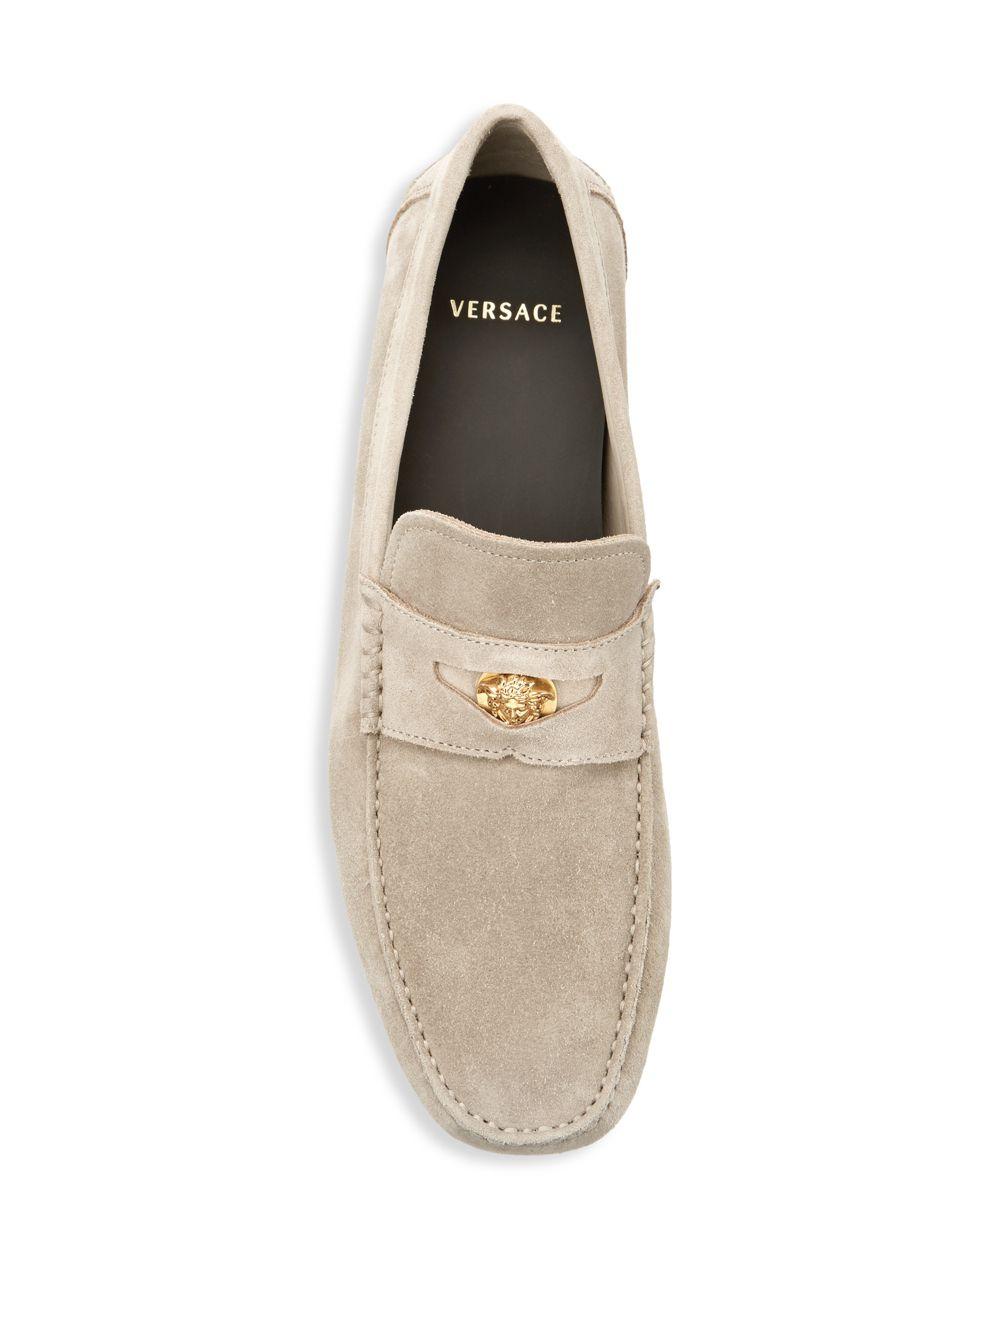 Versace Suede Driver Shoes in Light Beige (Natural) for Men - Lyst